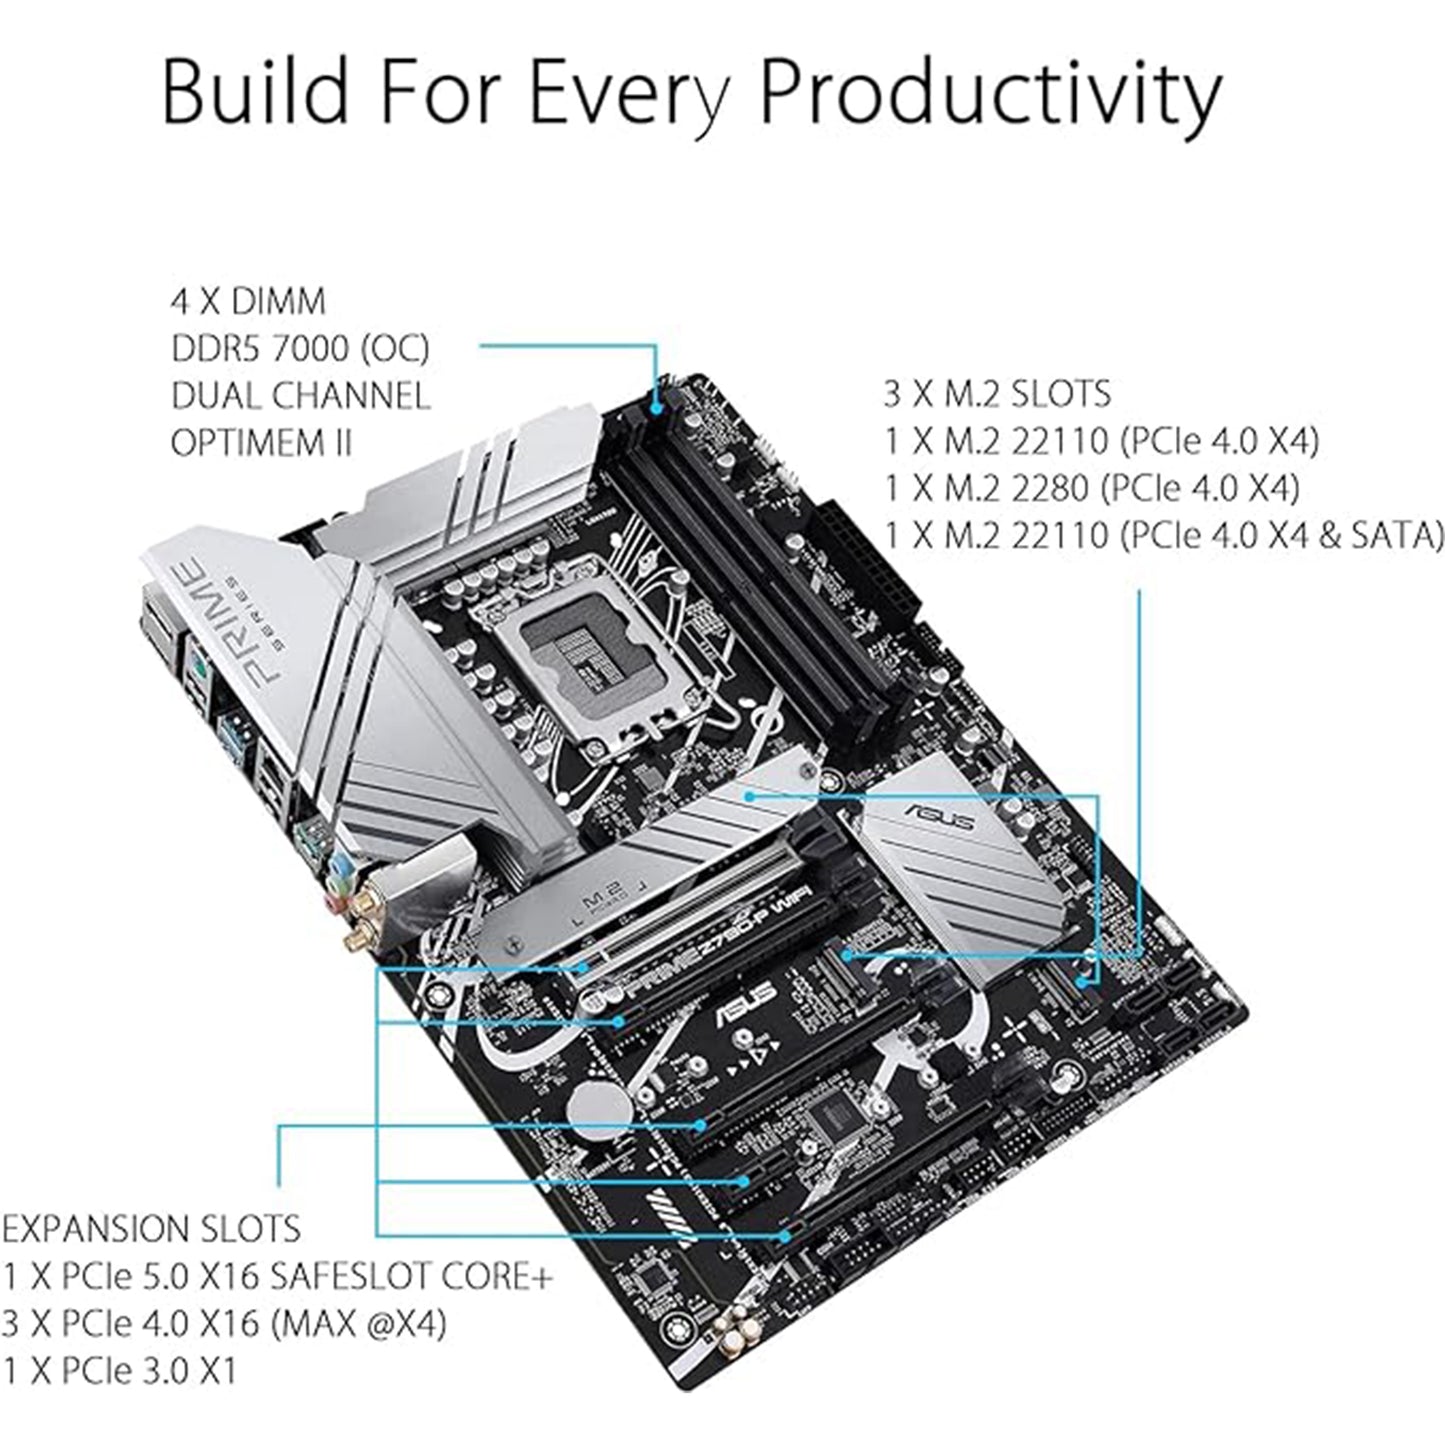 Micro Center Intel Core i9-12900K 16 (8P+8E) Cores up to 5.2 GHz Unlocked Desktop Processor with Integrated Intel UHD Graphics 770 Bundle with ASUS Prime Z790-P WiFi DDR5 ATX Gaming Motherboard